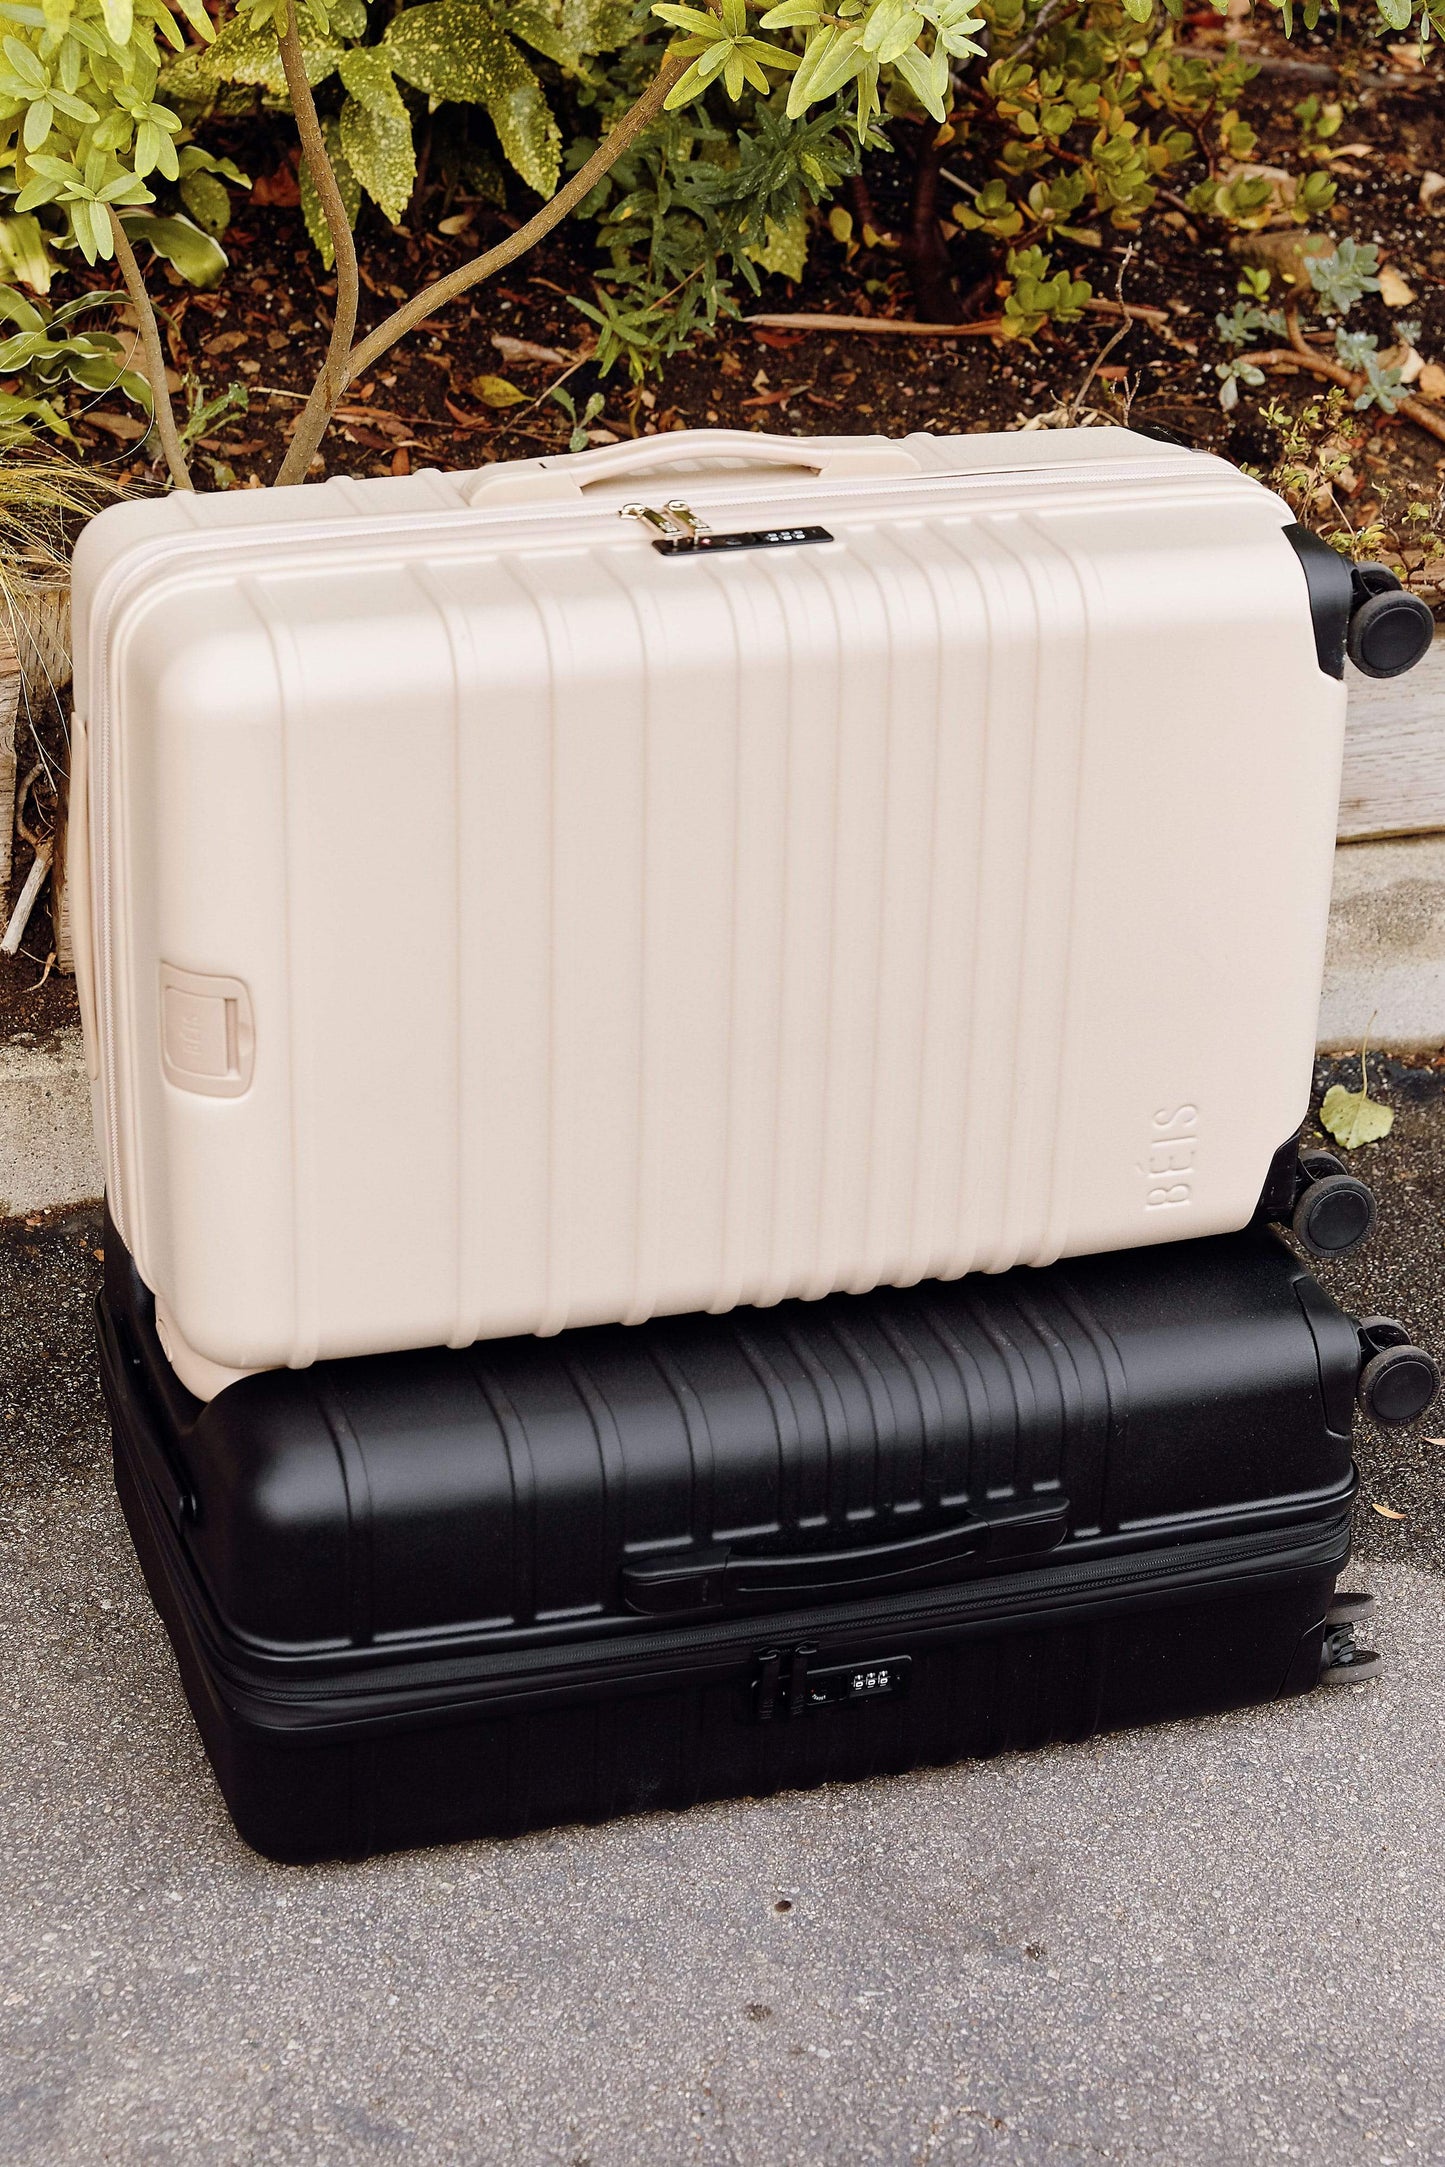 BEIS by Shay Mitchell | The 26" Check-In Roller in Beige on top of black luggage